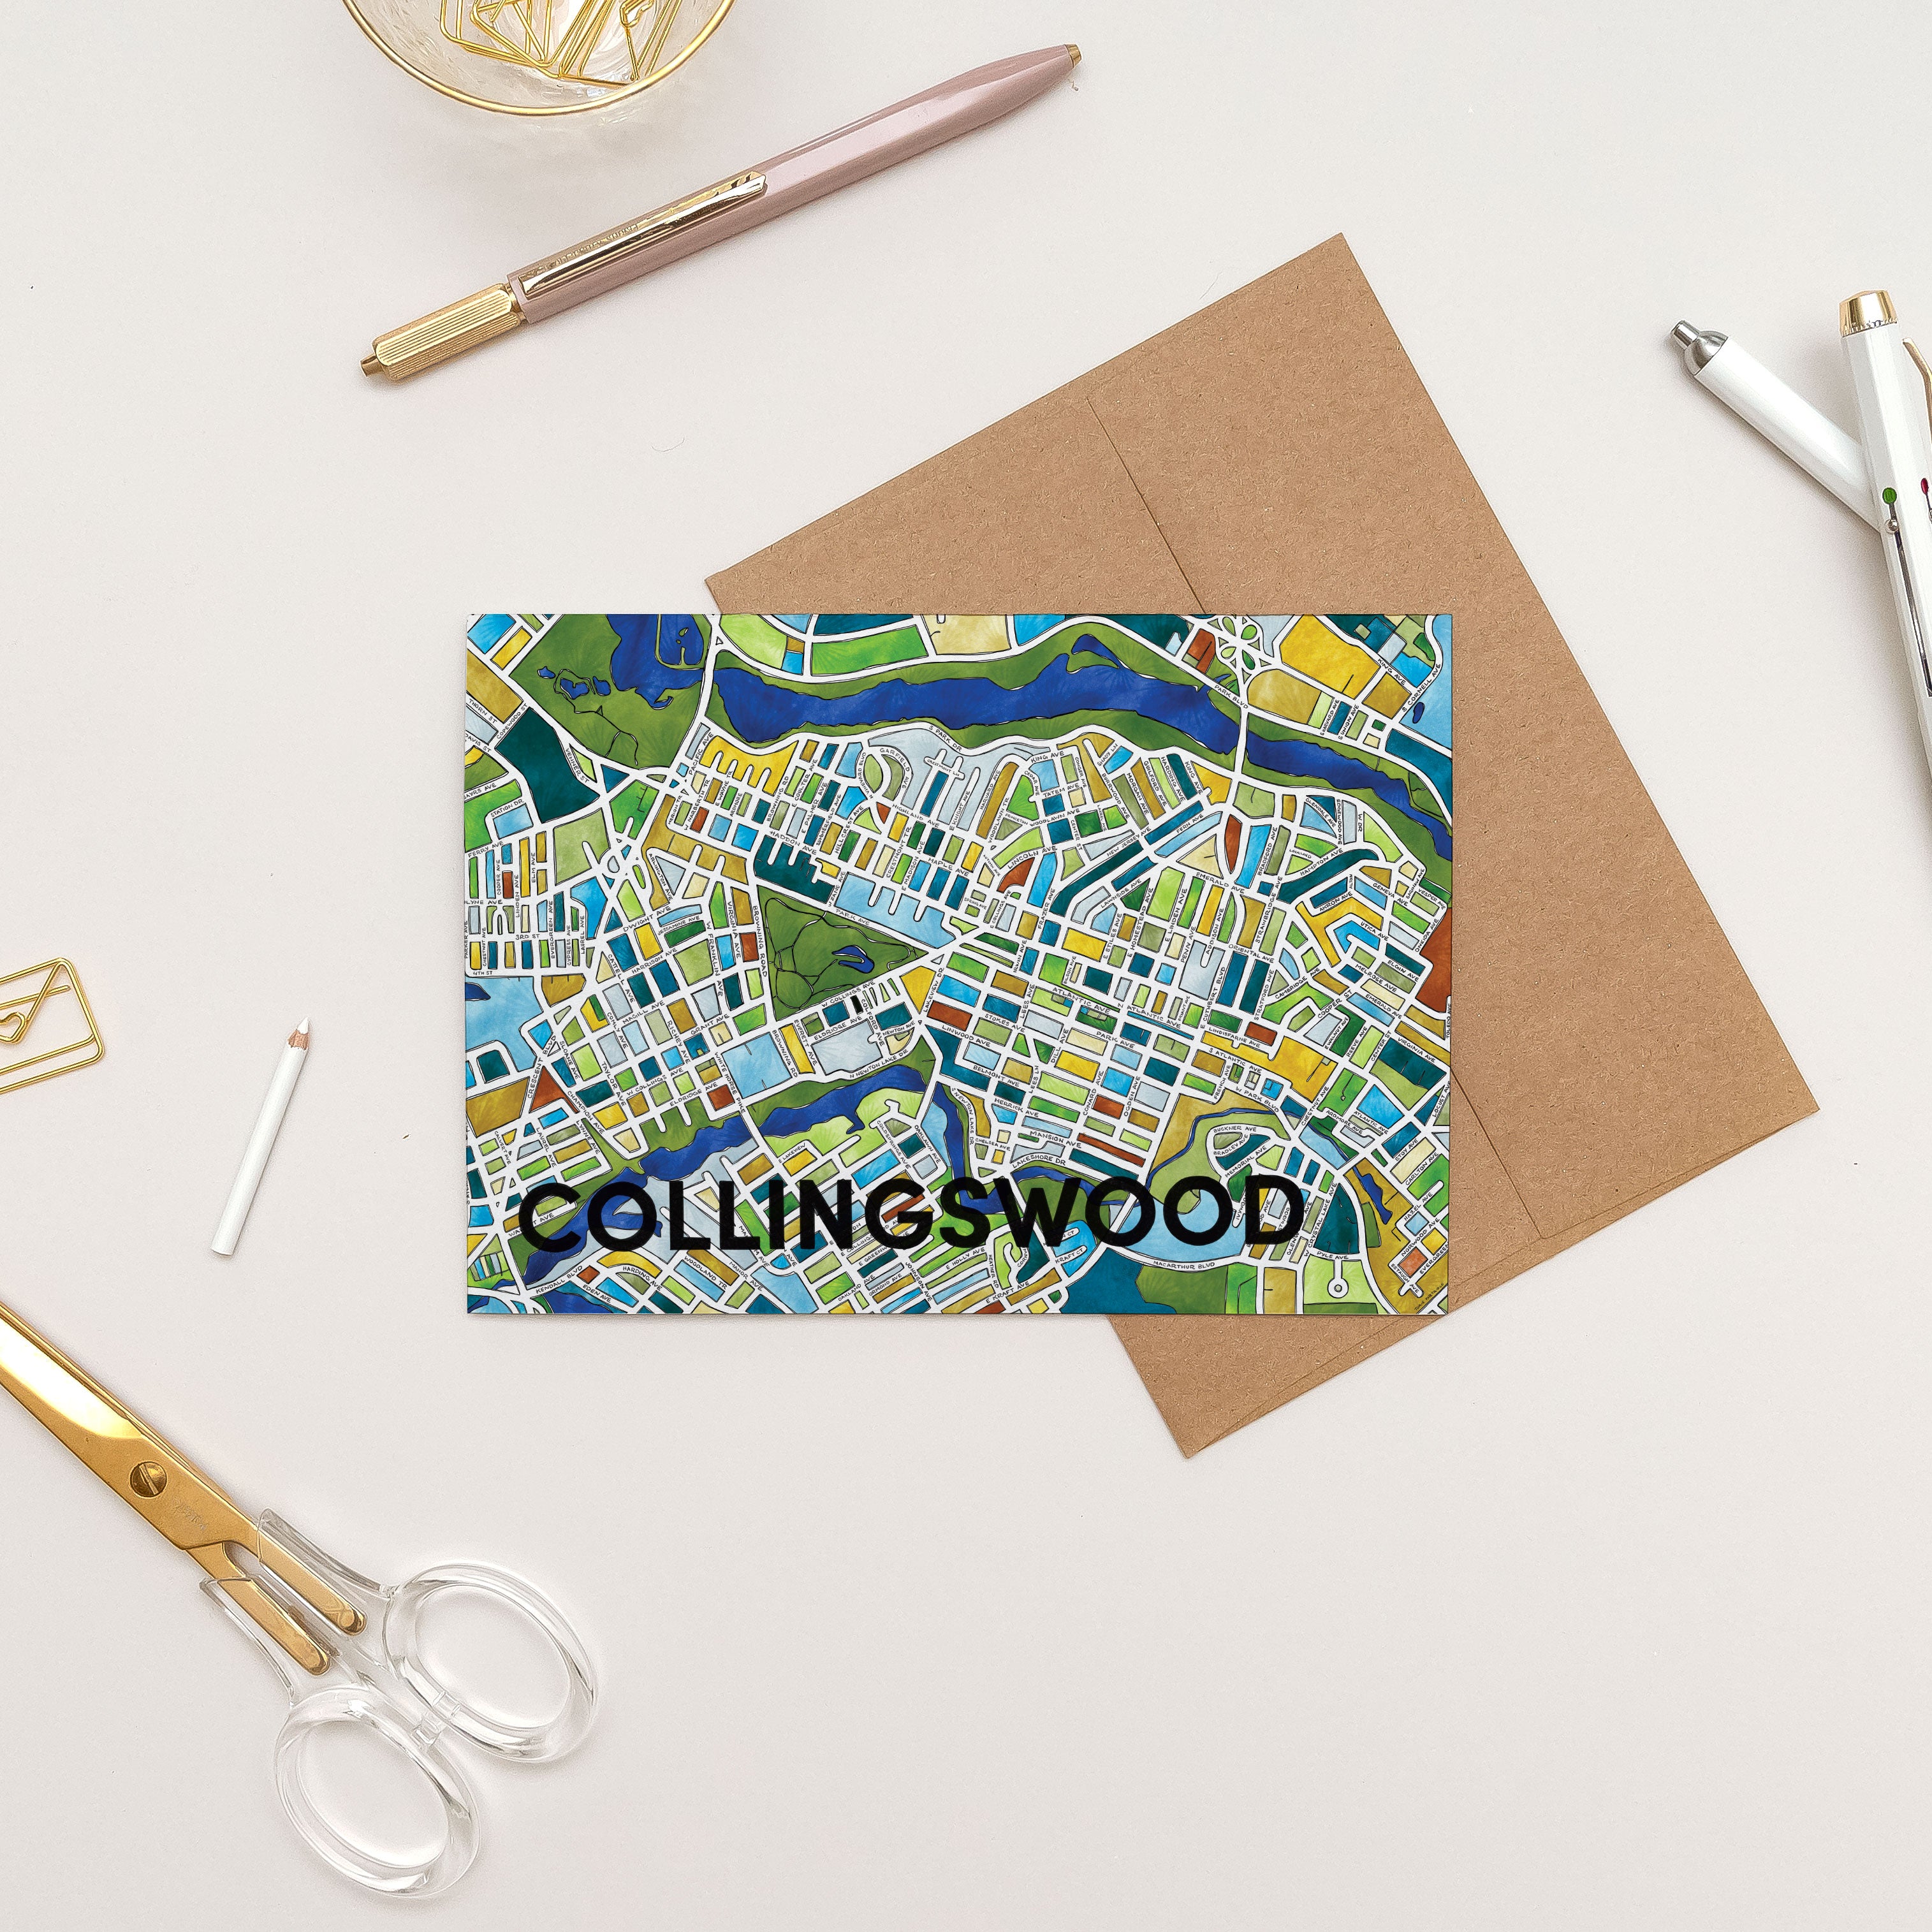 Collingswood (New Jersey) Greeting Card